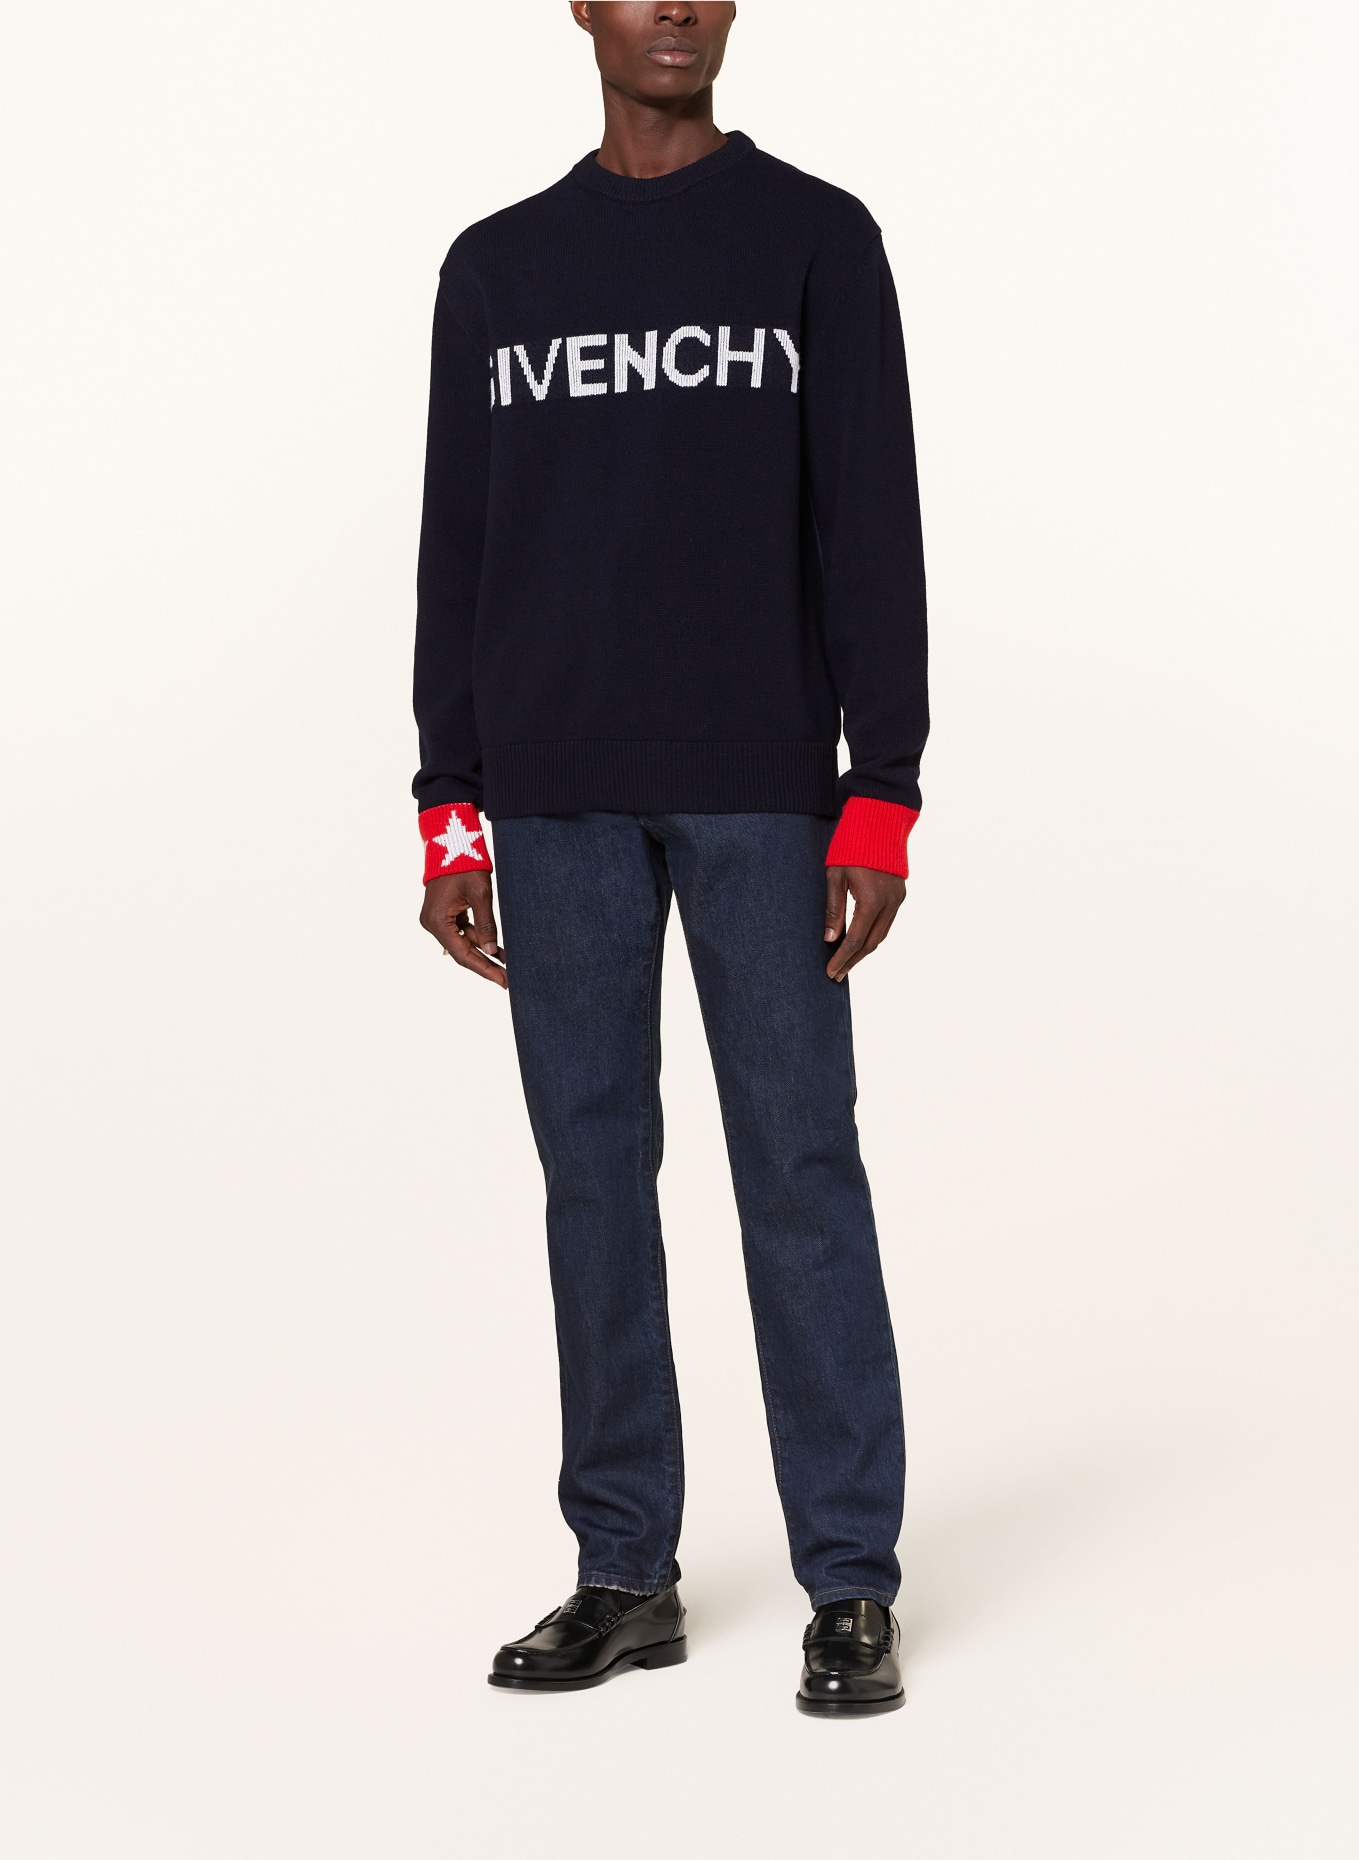 GIVENCHY Sweater in dark blue/ white/ red